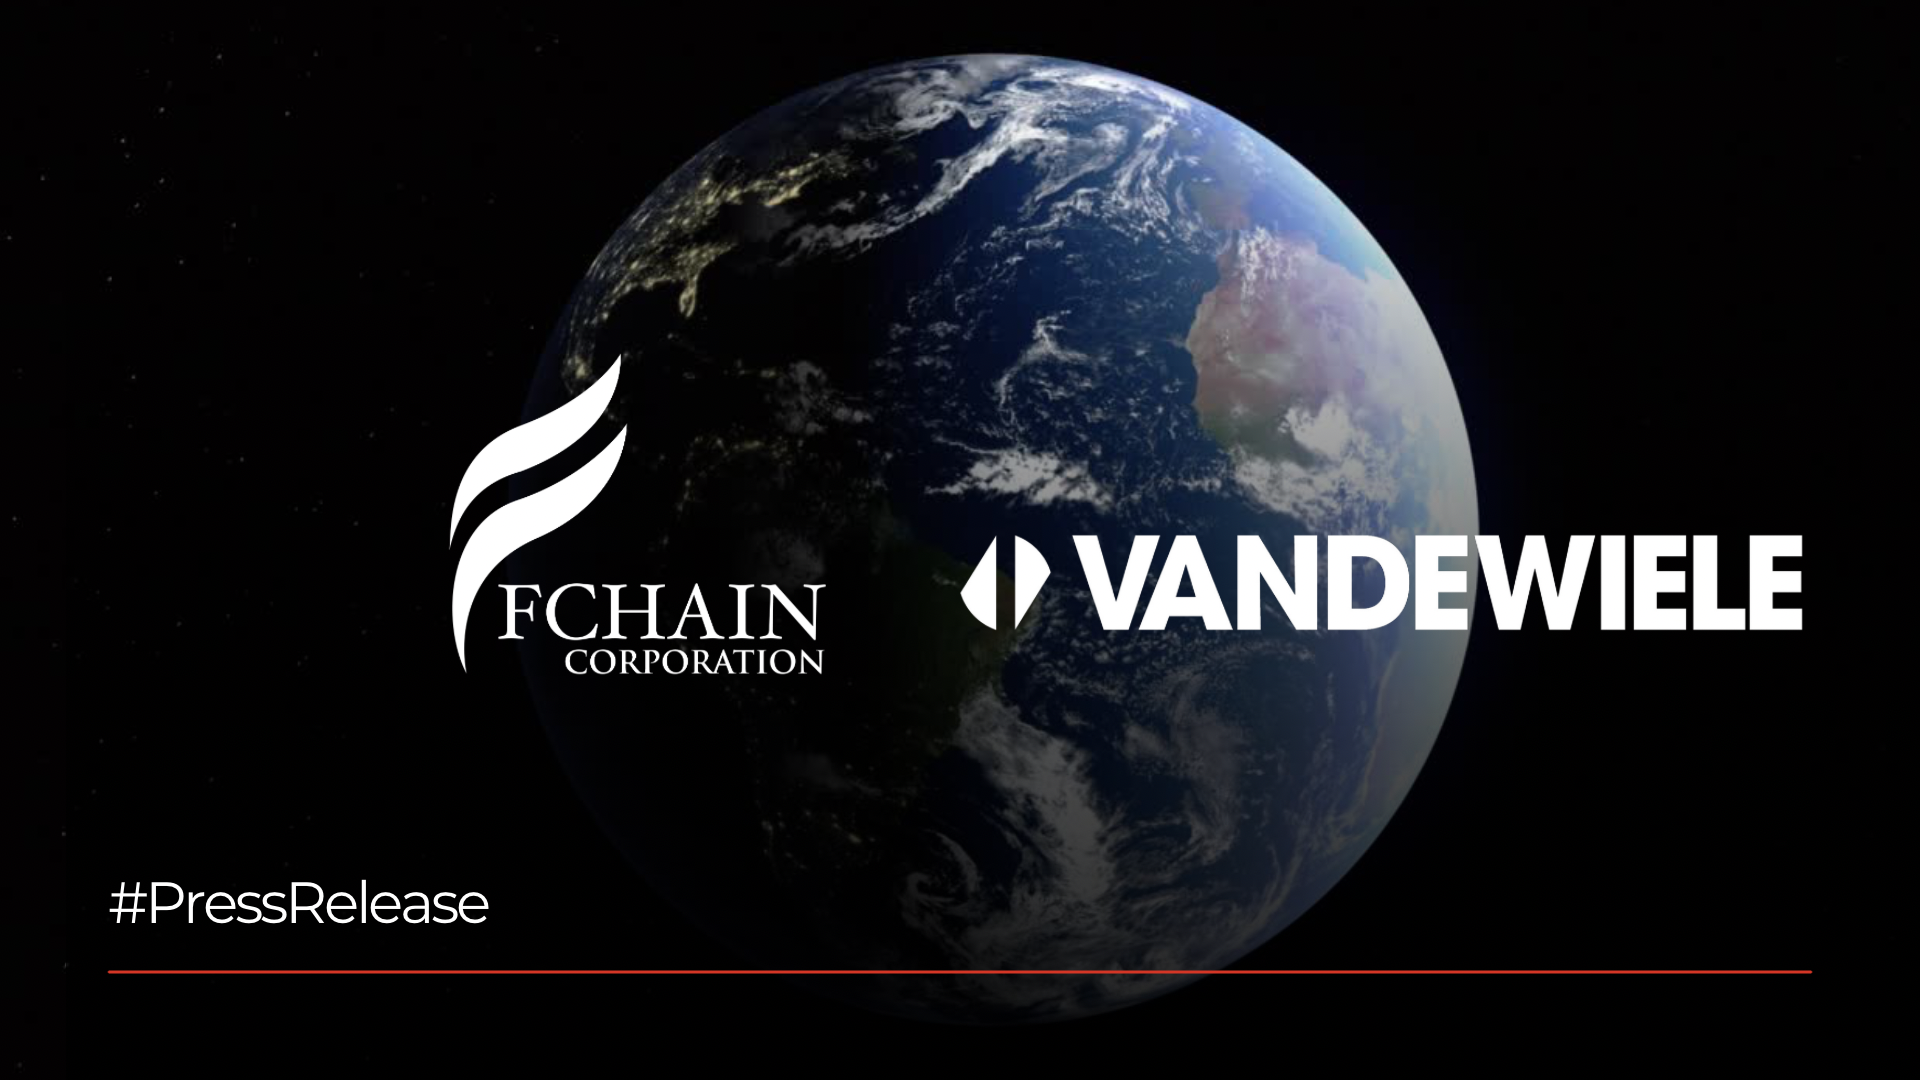 Vandewiele Group Partners with FCHAIN Corporation's Tashkent Branch to  Drive Global Growth